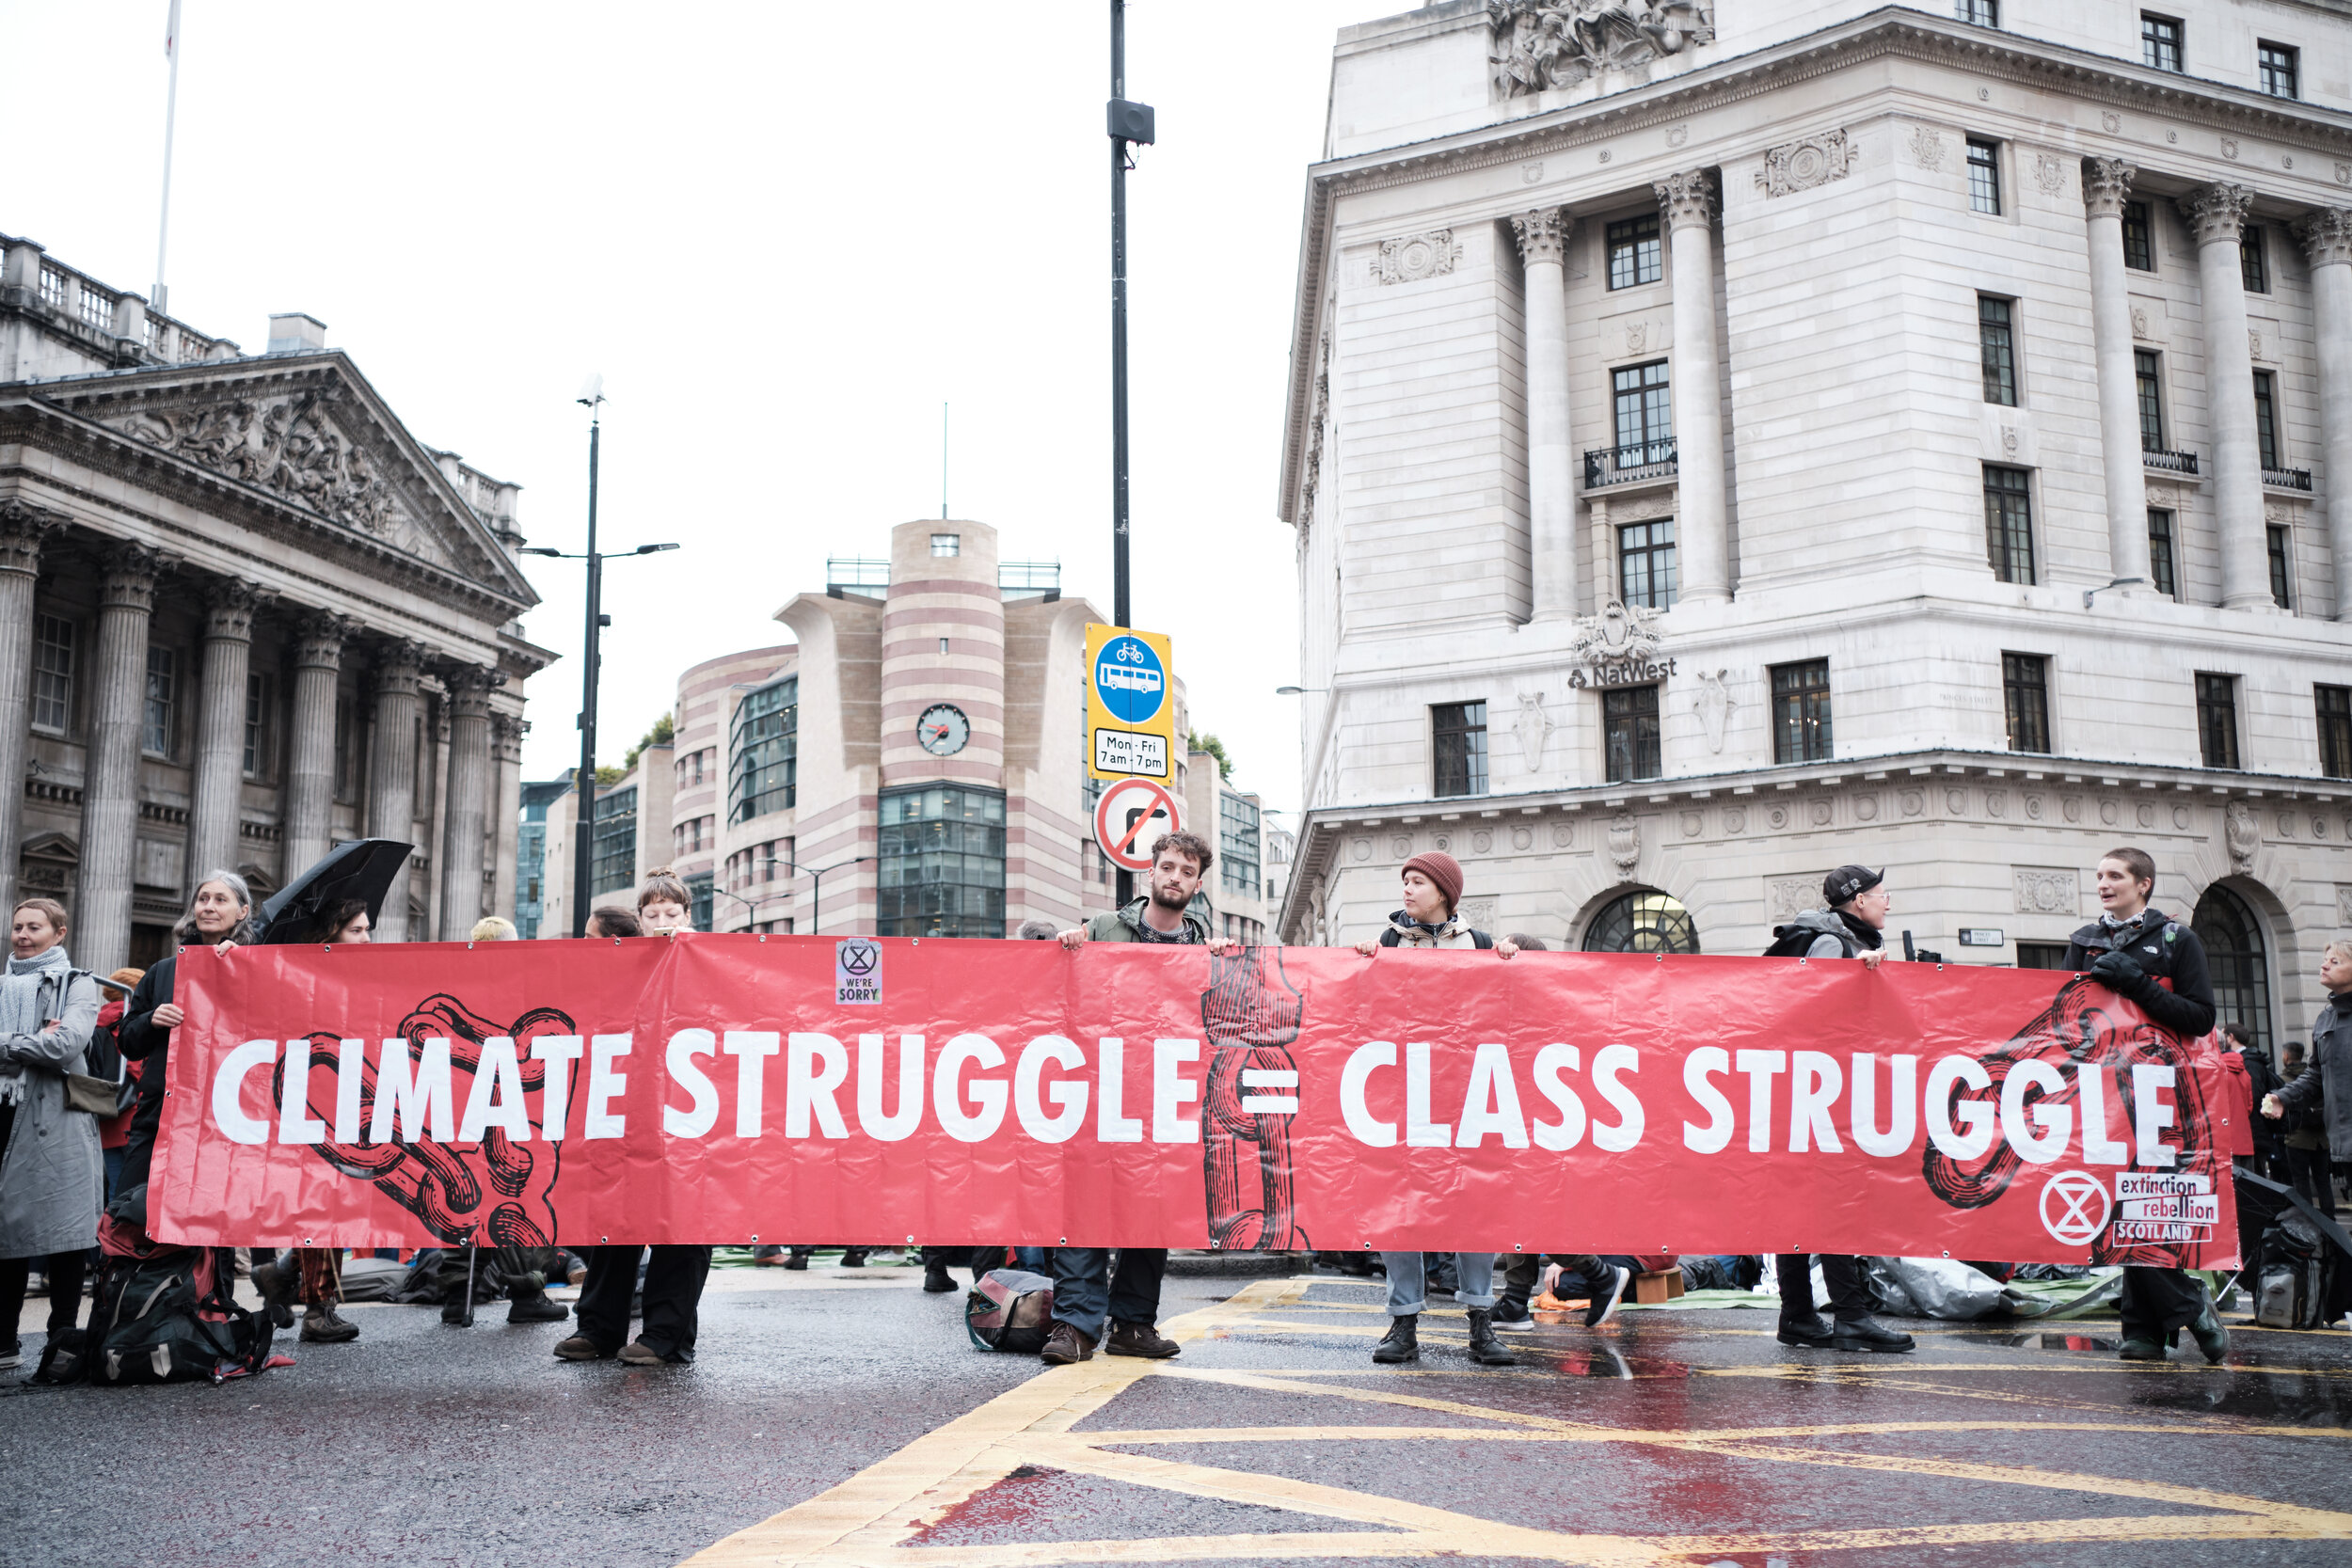  A key message of the day was on climate justice and the class war that climate change threatens: those that have contributed least to the problem will suffer the most, and are in fact already suffering. The day of disruption sought to highlight the 